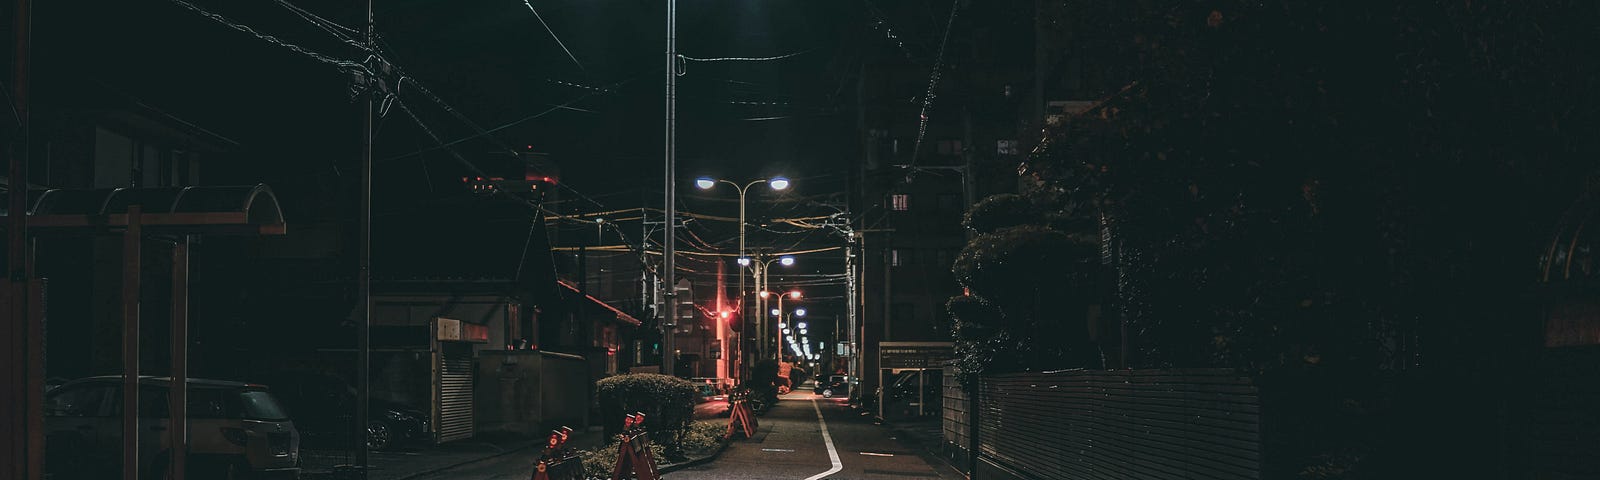 A quiet alley with faded streetlamps and red traffic lamp in front at midnight